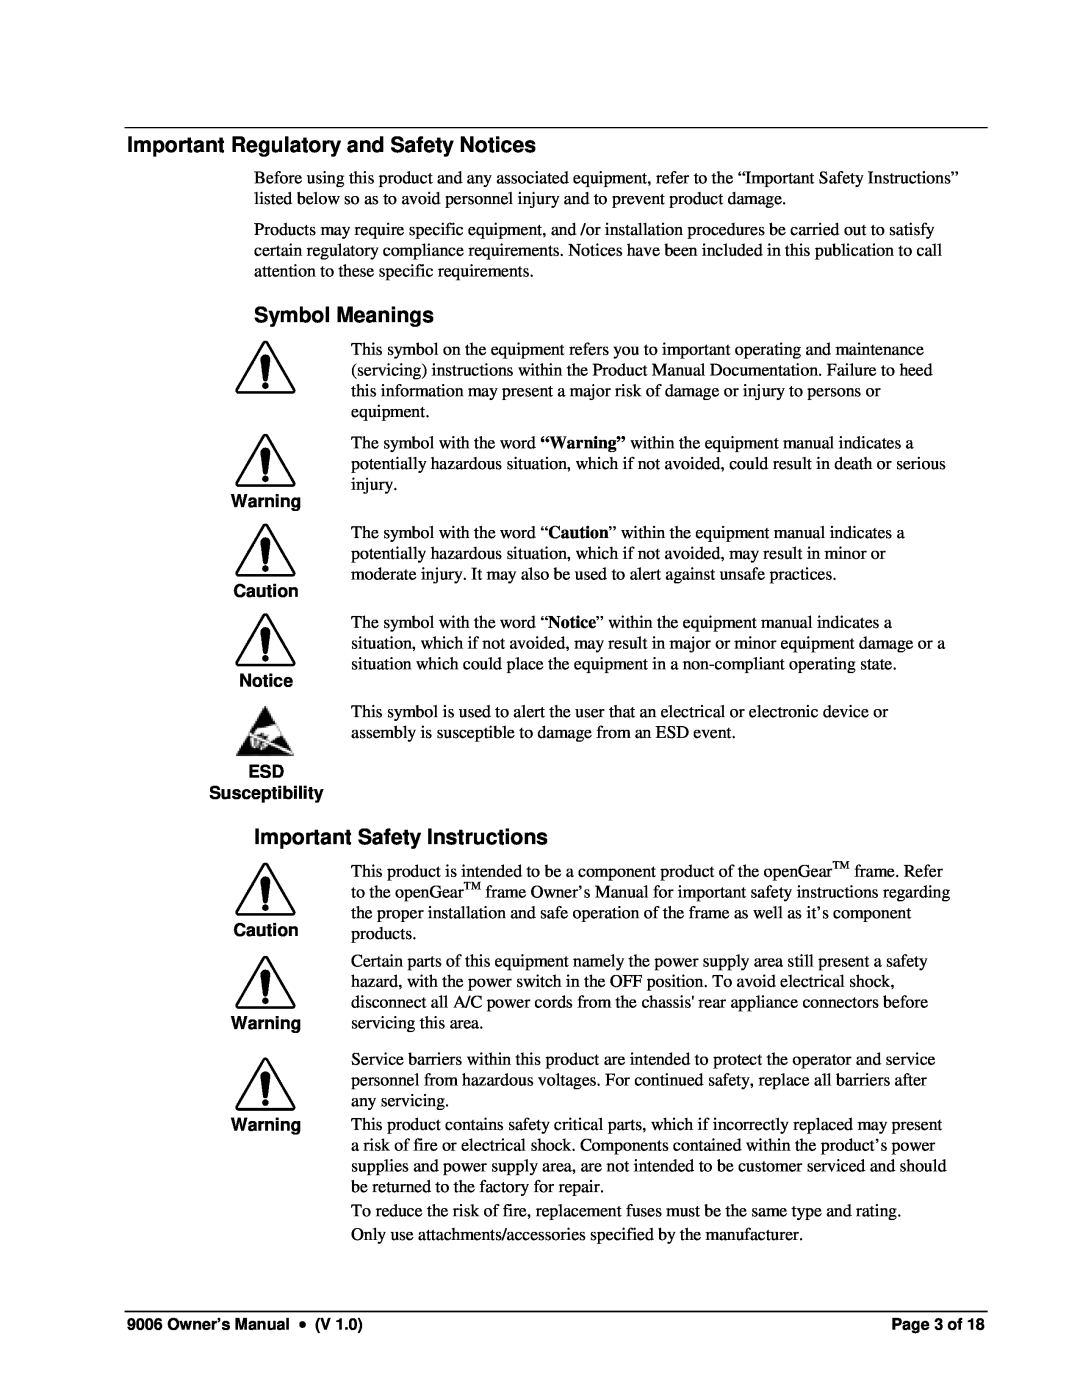 Cobalt Networks 9006 owner manual Important Regulatory and Safety Notices, Symbol Meanings, Important Safety Instructions 